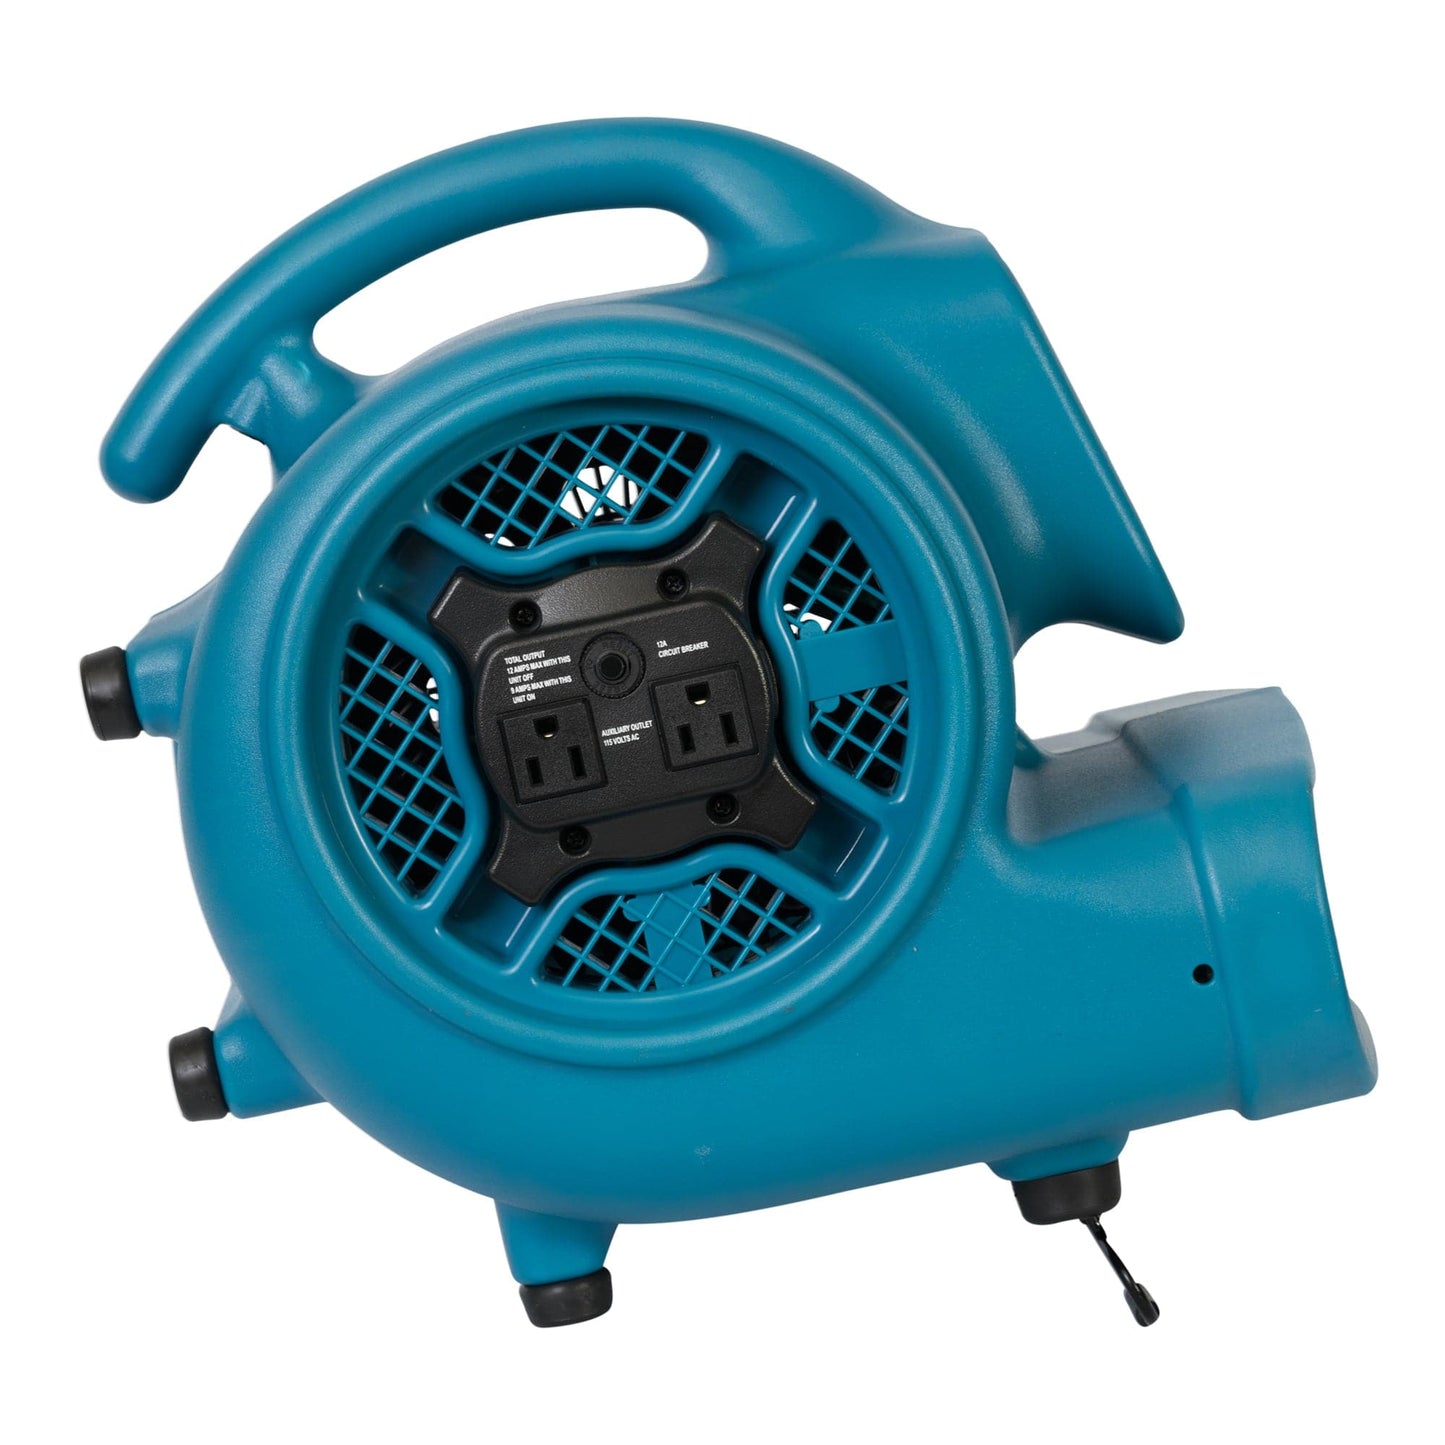 XPOWER X-400A 1/4 HP 1600 CFM 3 Speed Air Mover, Carpet Dryer, Floor Fan, Blower with Built-in Power Outlets